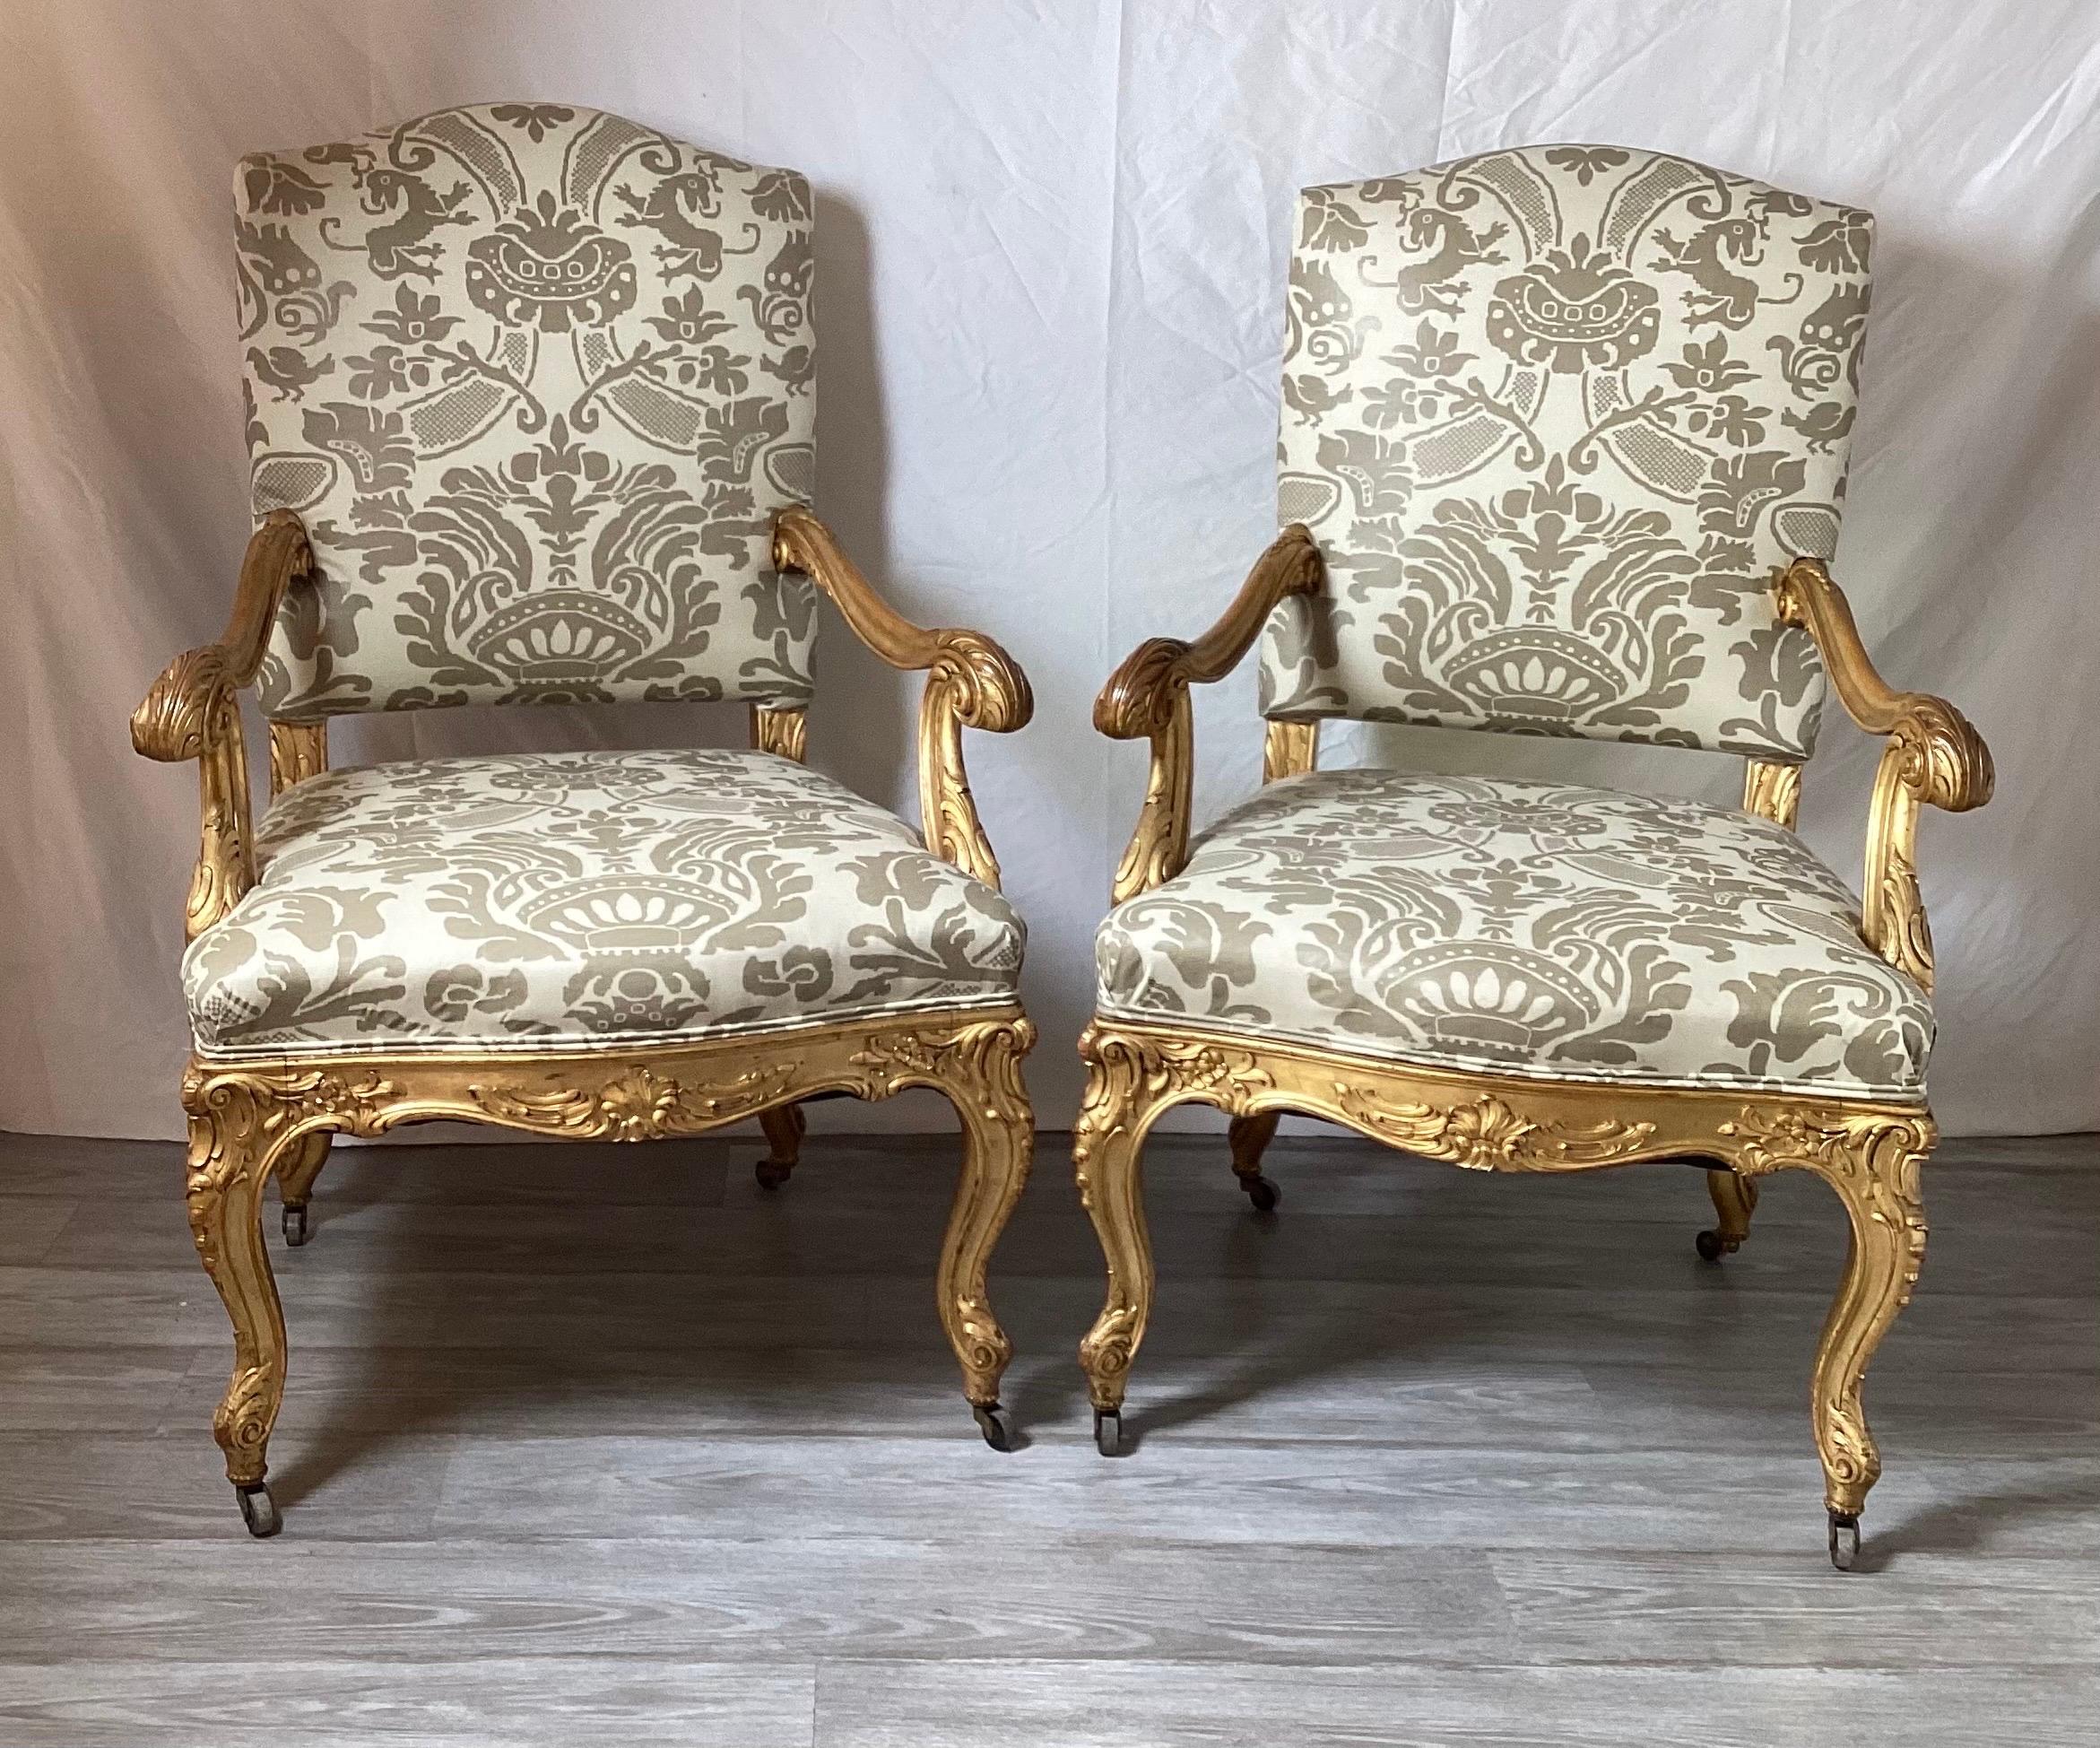 A beautiful pair of hand carved walnut open arm chairs in Newly upholstered vintage Fonisetti style large print damask. fabric. The masterfully carved frames with real gold leaf with original age wear on the arms. The chairs newly recovered in a